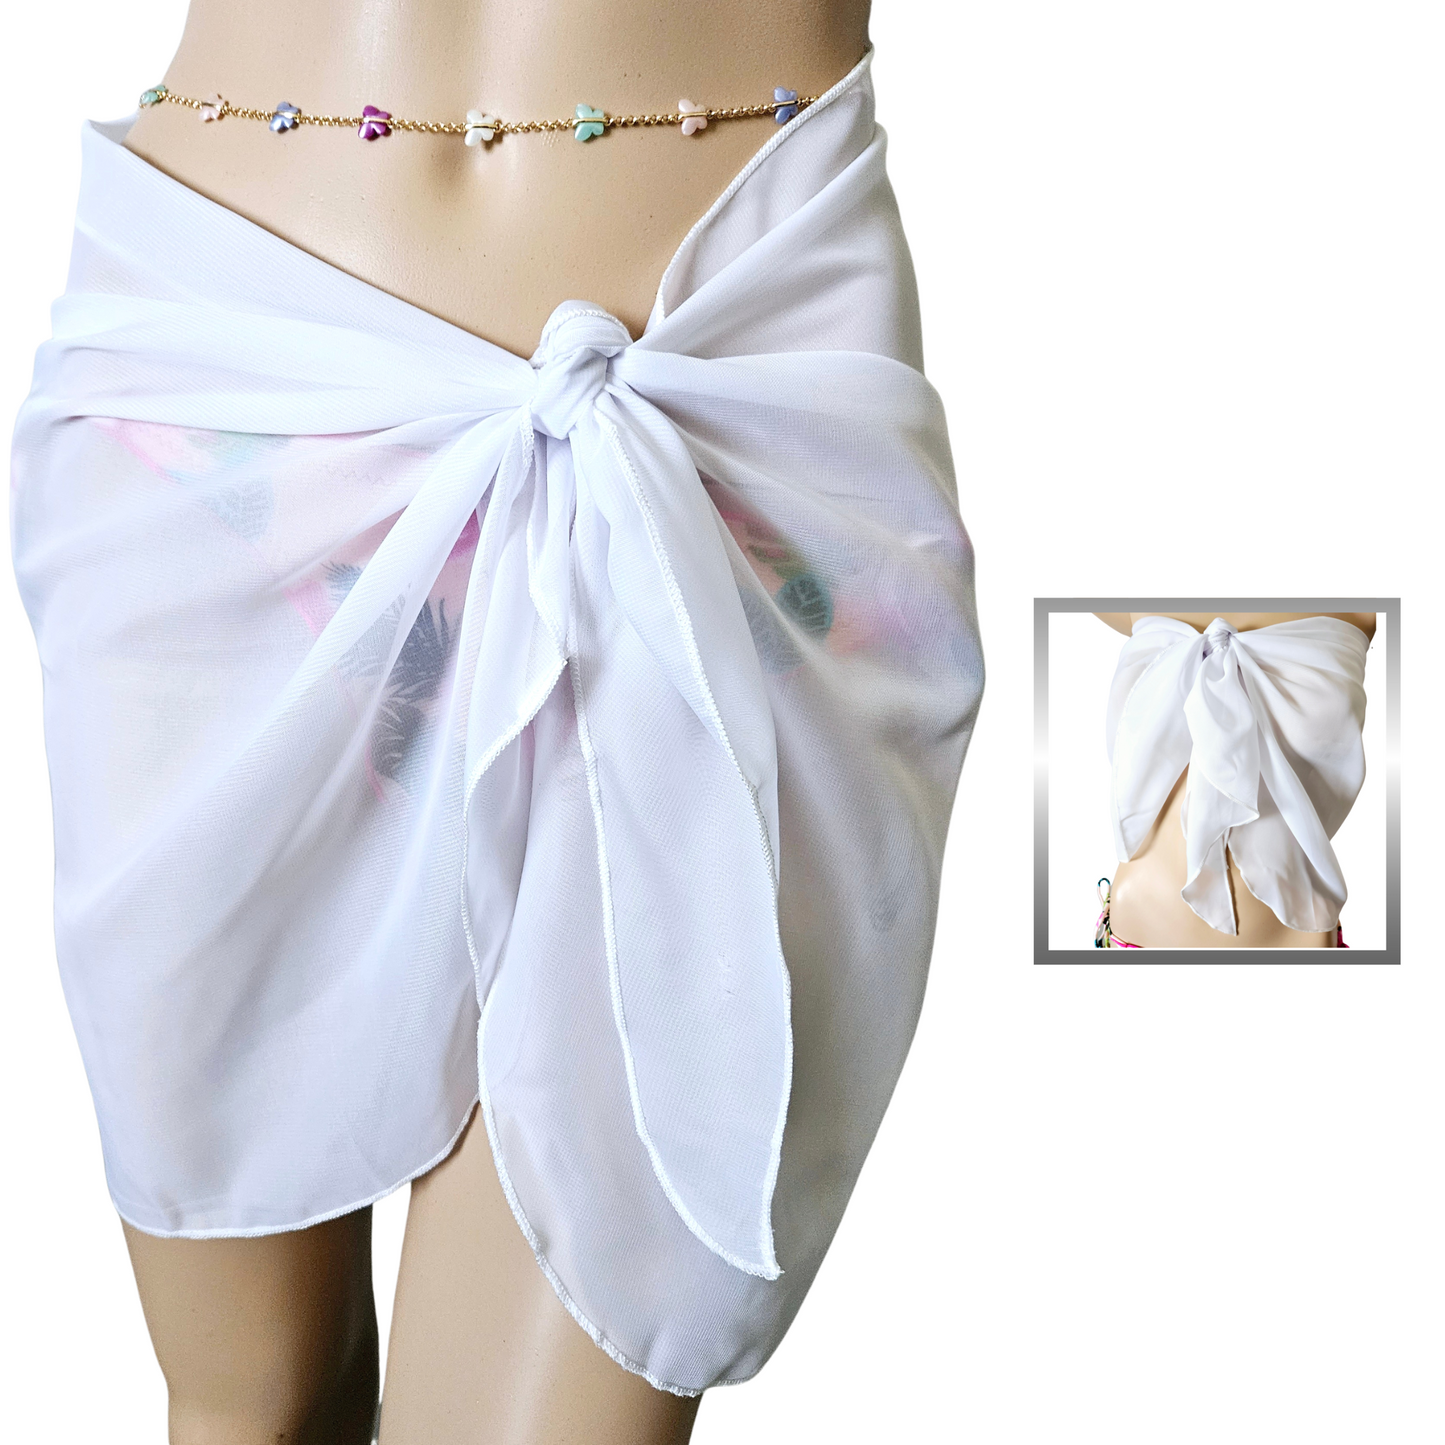 White Women's Swimsuit Cover Up Sarong Cover-Ups Wrap Skirt